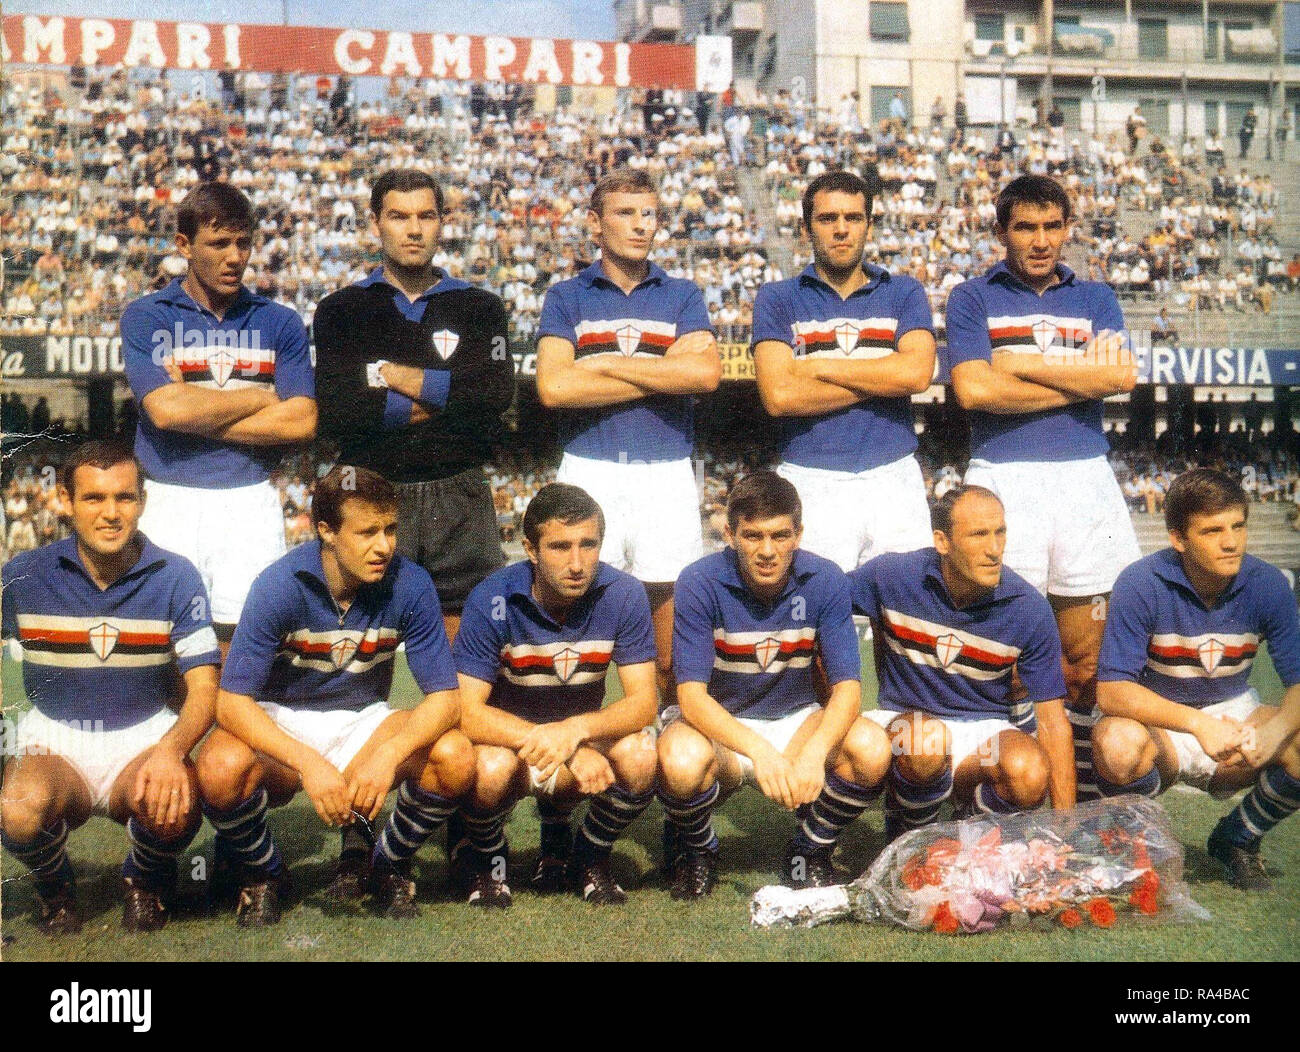 A group photo of Sampdoria in the 1966-67 season, posing inside the Luigi Ferraris stadium in Genoa; we recognize Francesco Morini (standing in the middle) and the captain Mario Frustalupi (squat, first from the left). Stock Photo